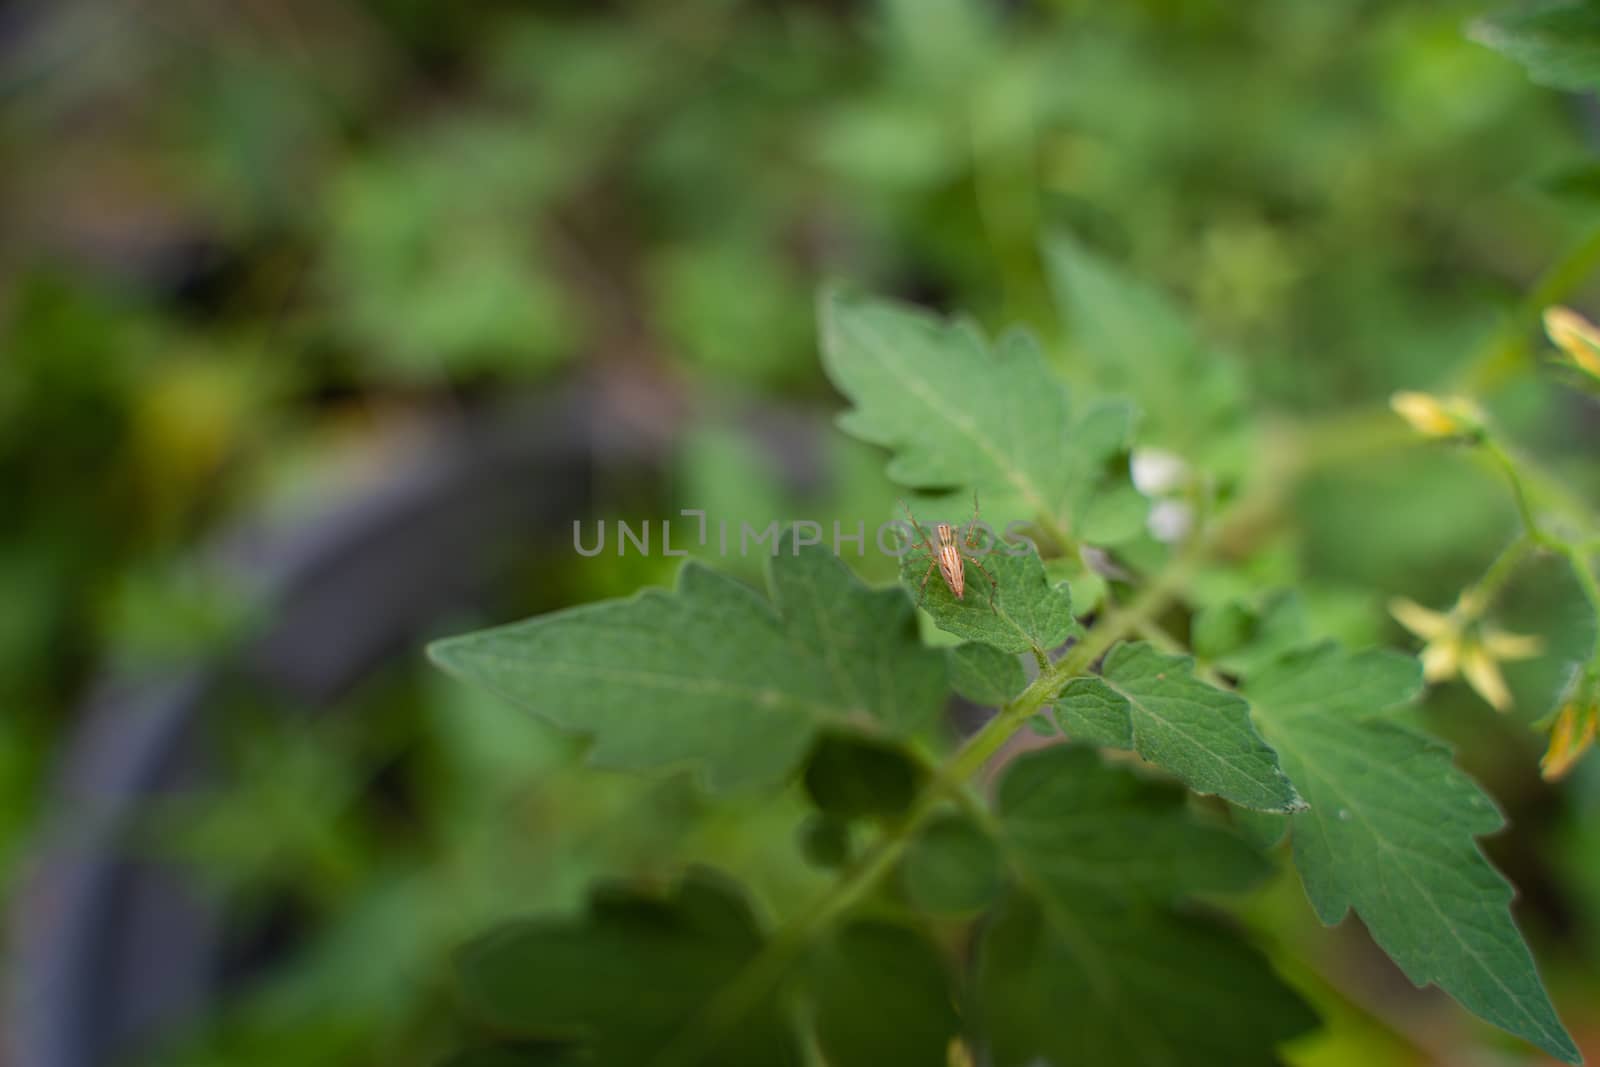 A Small spider on leaf. A close up of the very small green spider on leaf